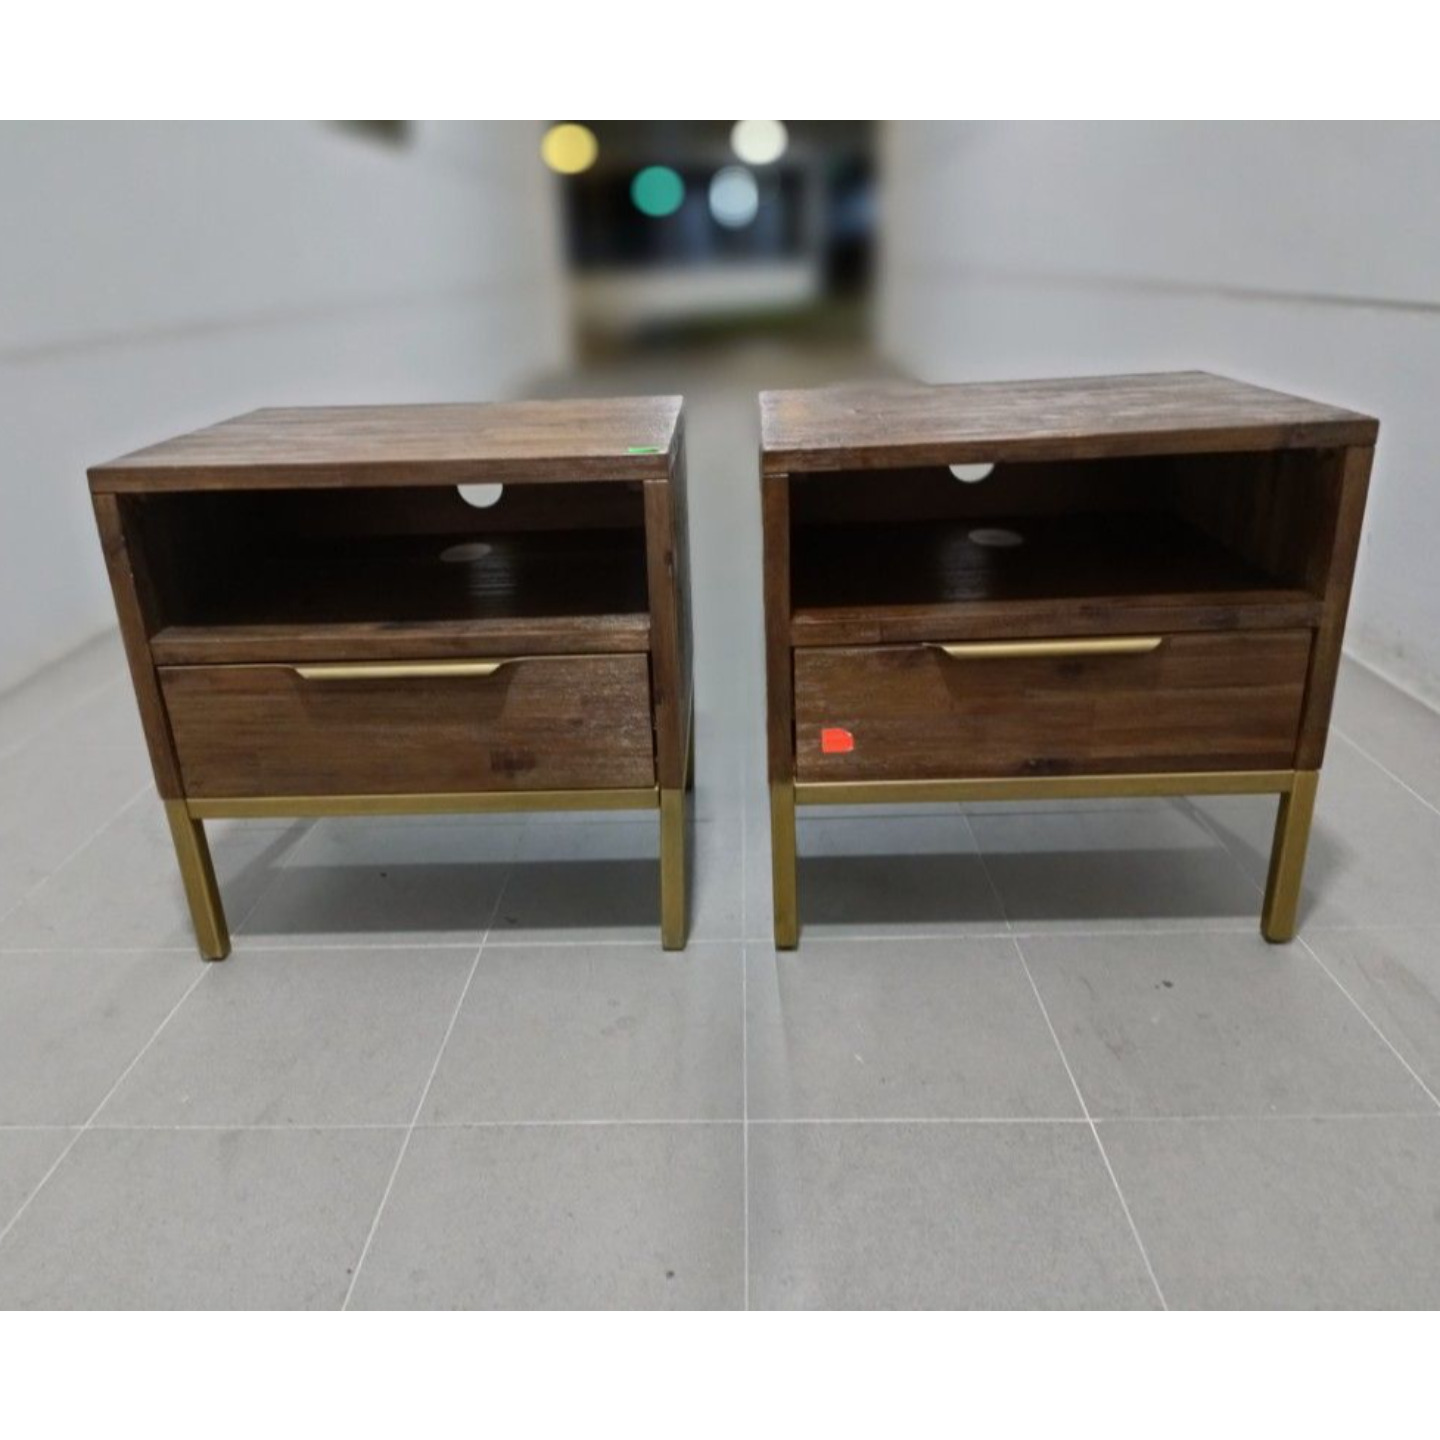 One Pair of MONYUK Wooden Bedside Table